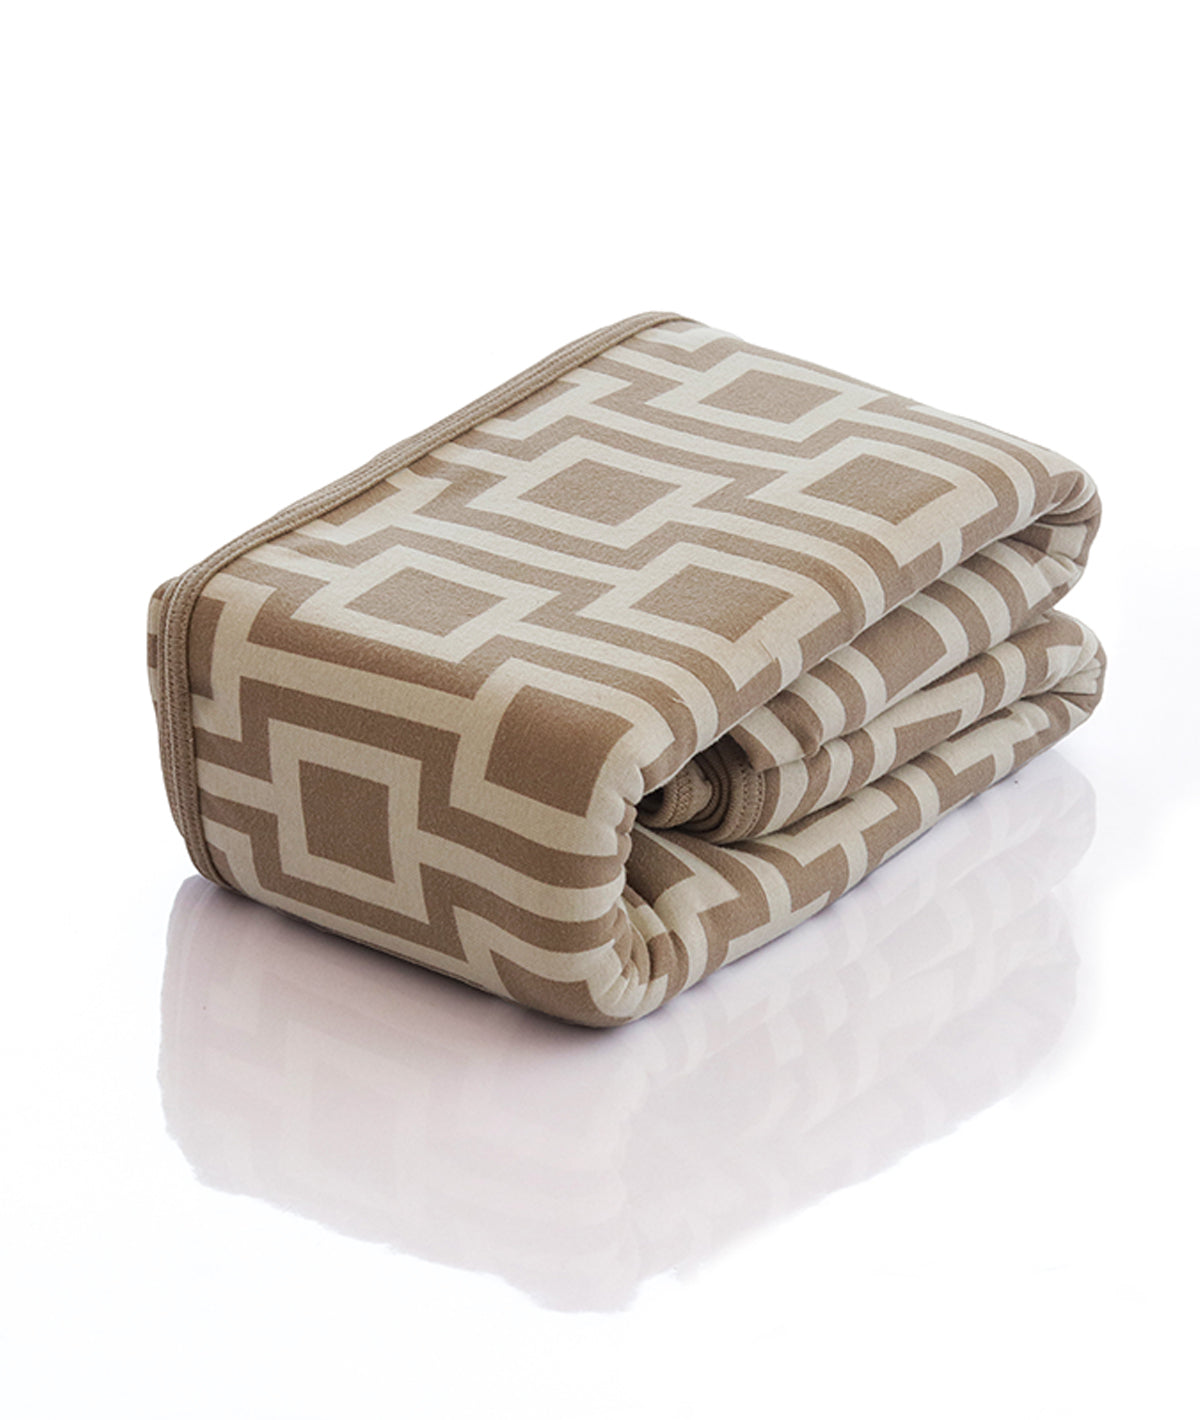 Box In Box Cotton Knitted Double Bed AC Blanket / Dohar For Round The Year Use (Stone & Natural)